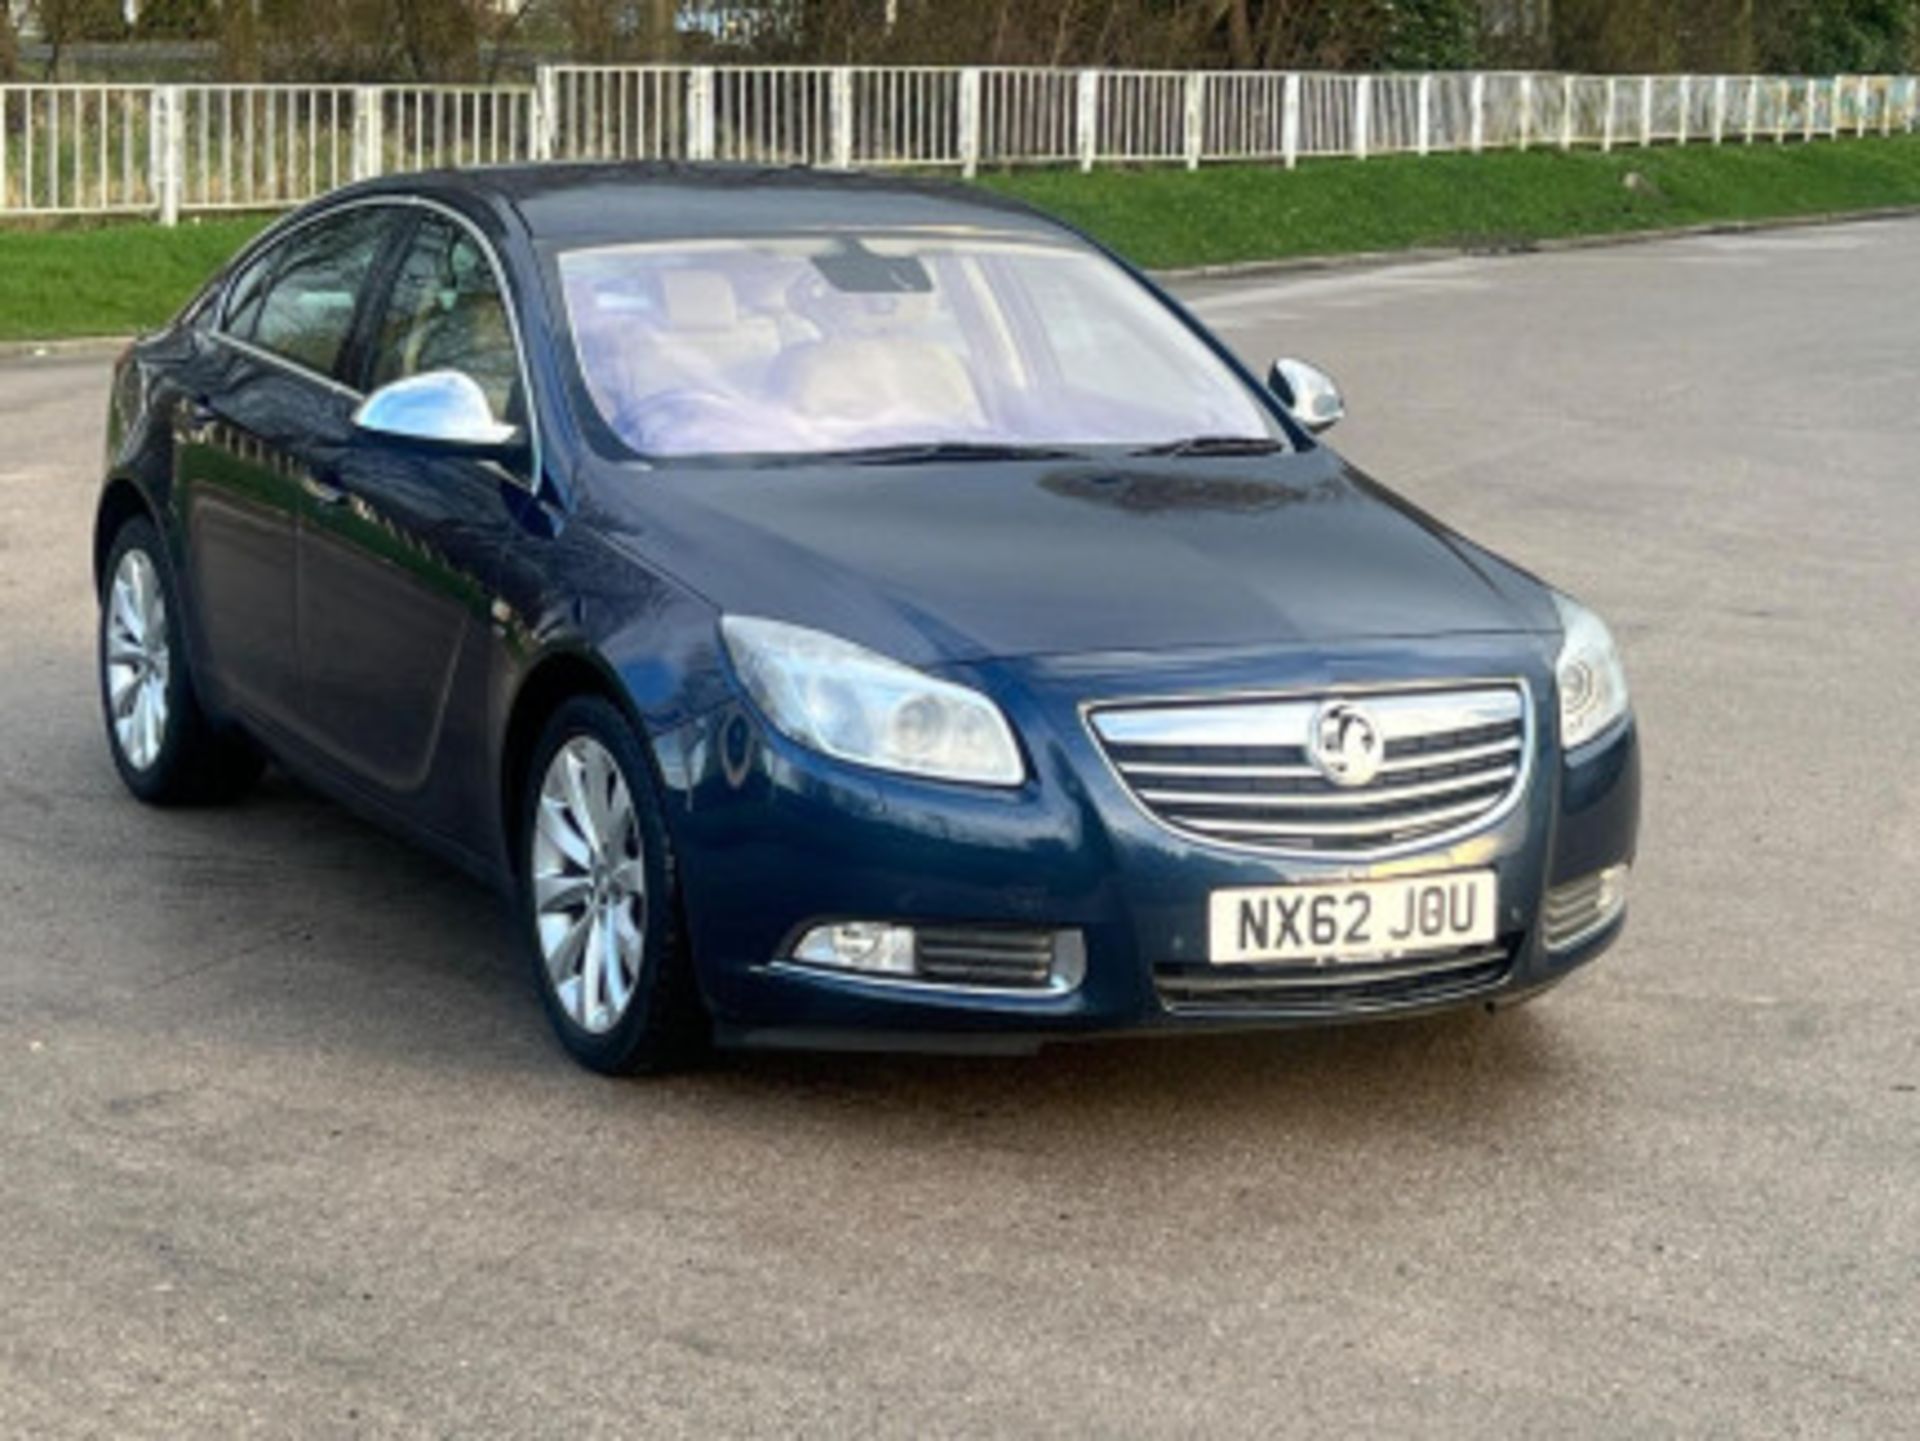 2012 VAUXHALL INSIGNIA 2.0 CDTI ELITE AUTO EURO 5 - DISCOVER EXCELLENCE >>--NO VAT ON HAMMER--<< - Image 33 of 79